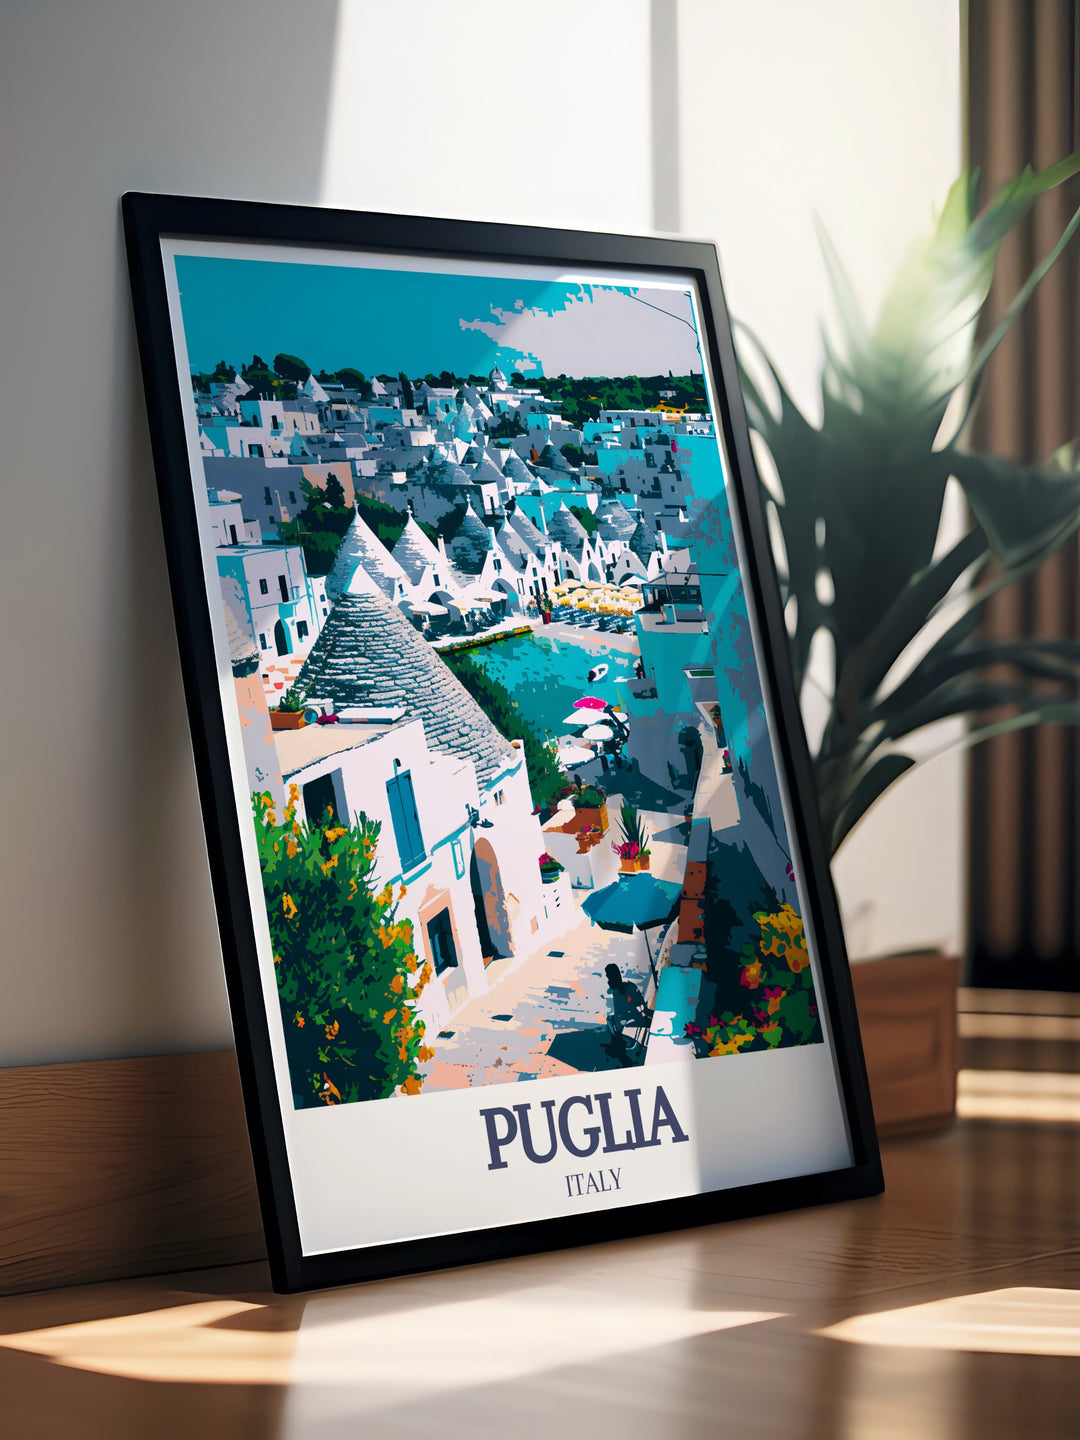 Discover the beauty of Trulli houses and the Adriatic Sea with our Puglia Print. This Italy Travel Gift is a thoughtful present for art lovers, capturing the picturesque landscapes of Italy and the charm of Trulli houses and the Adriatic Sea.